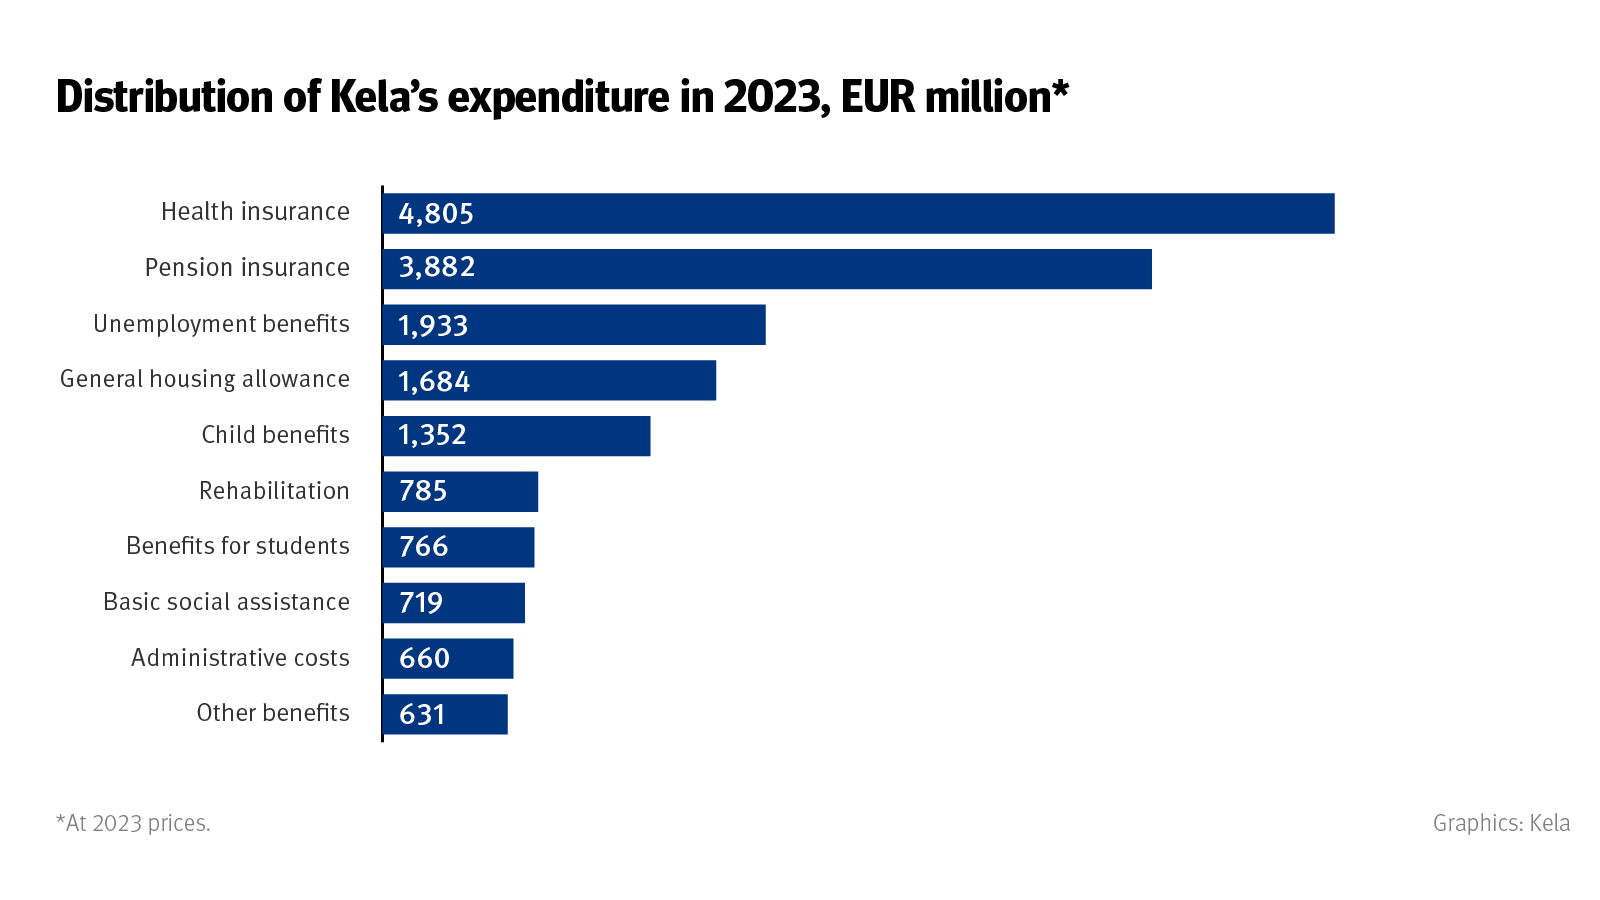 Title of the graphic: Distribution of Kela’s expenditure in 2023.